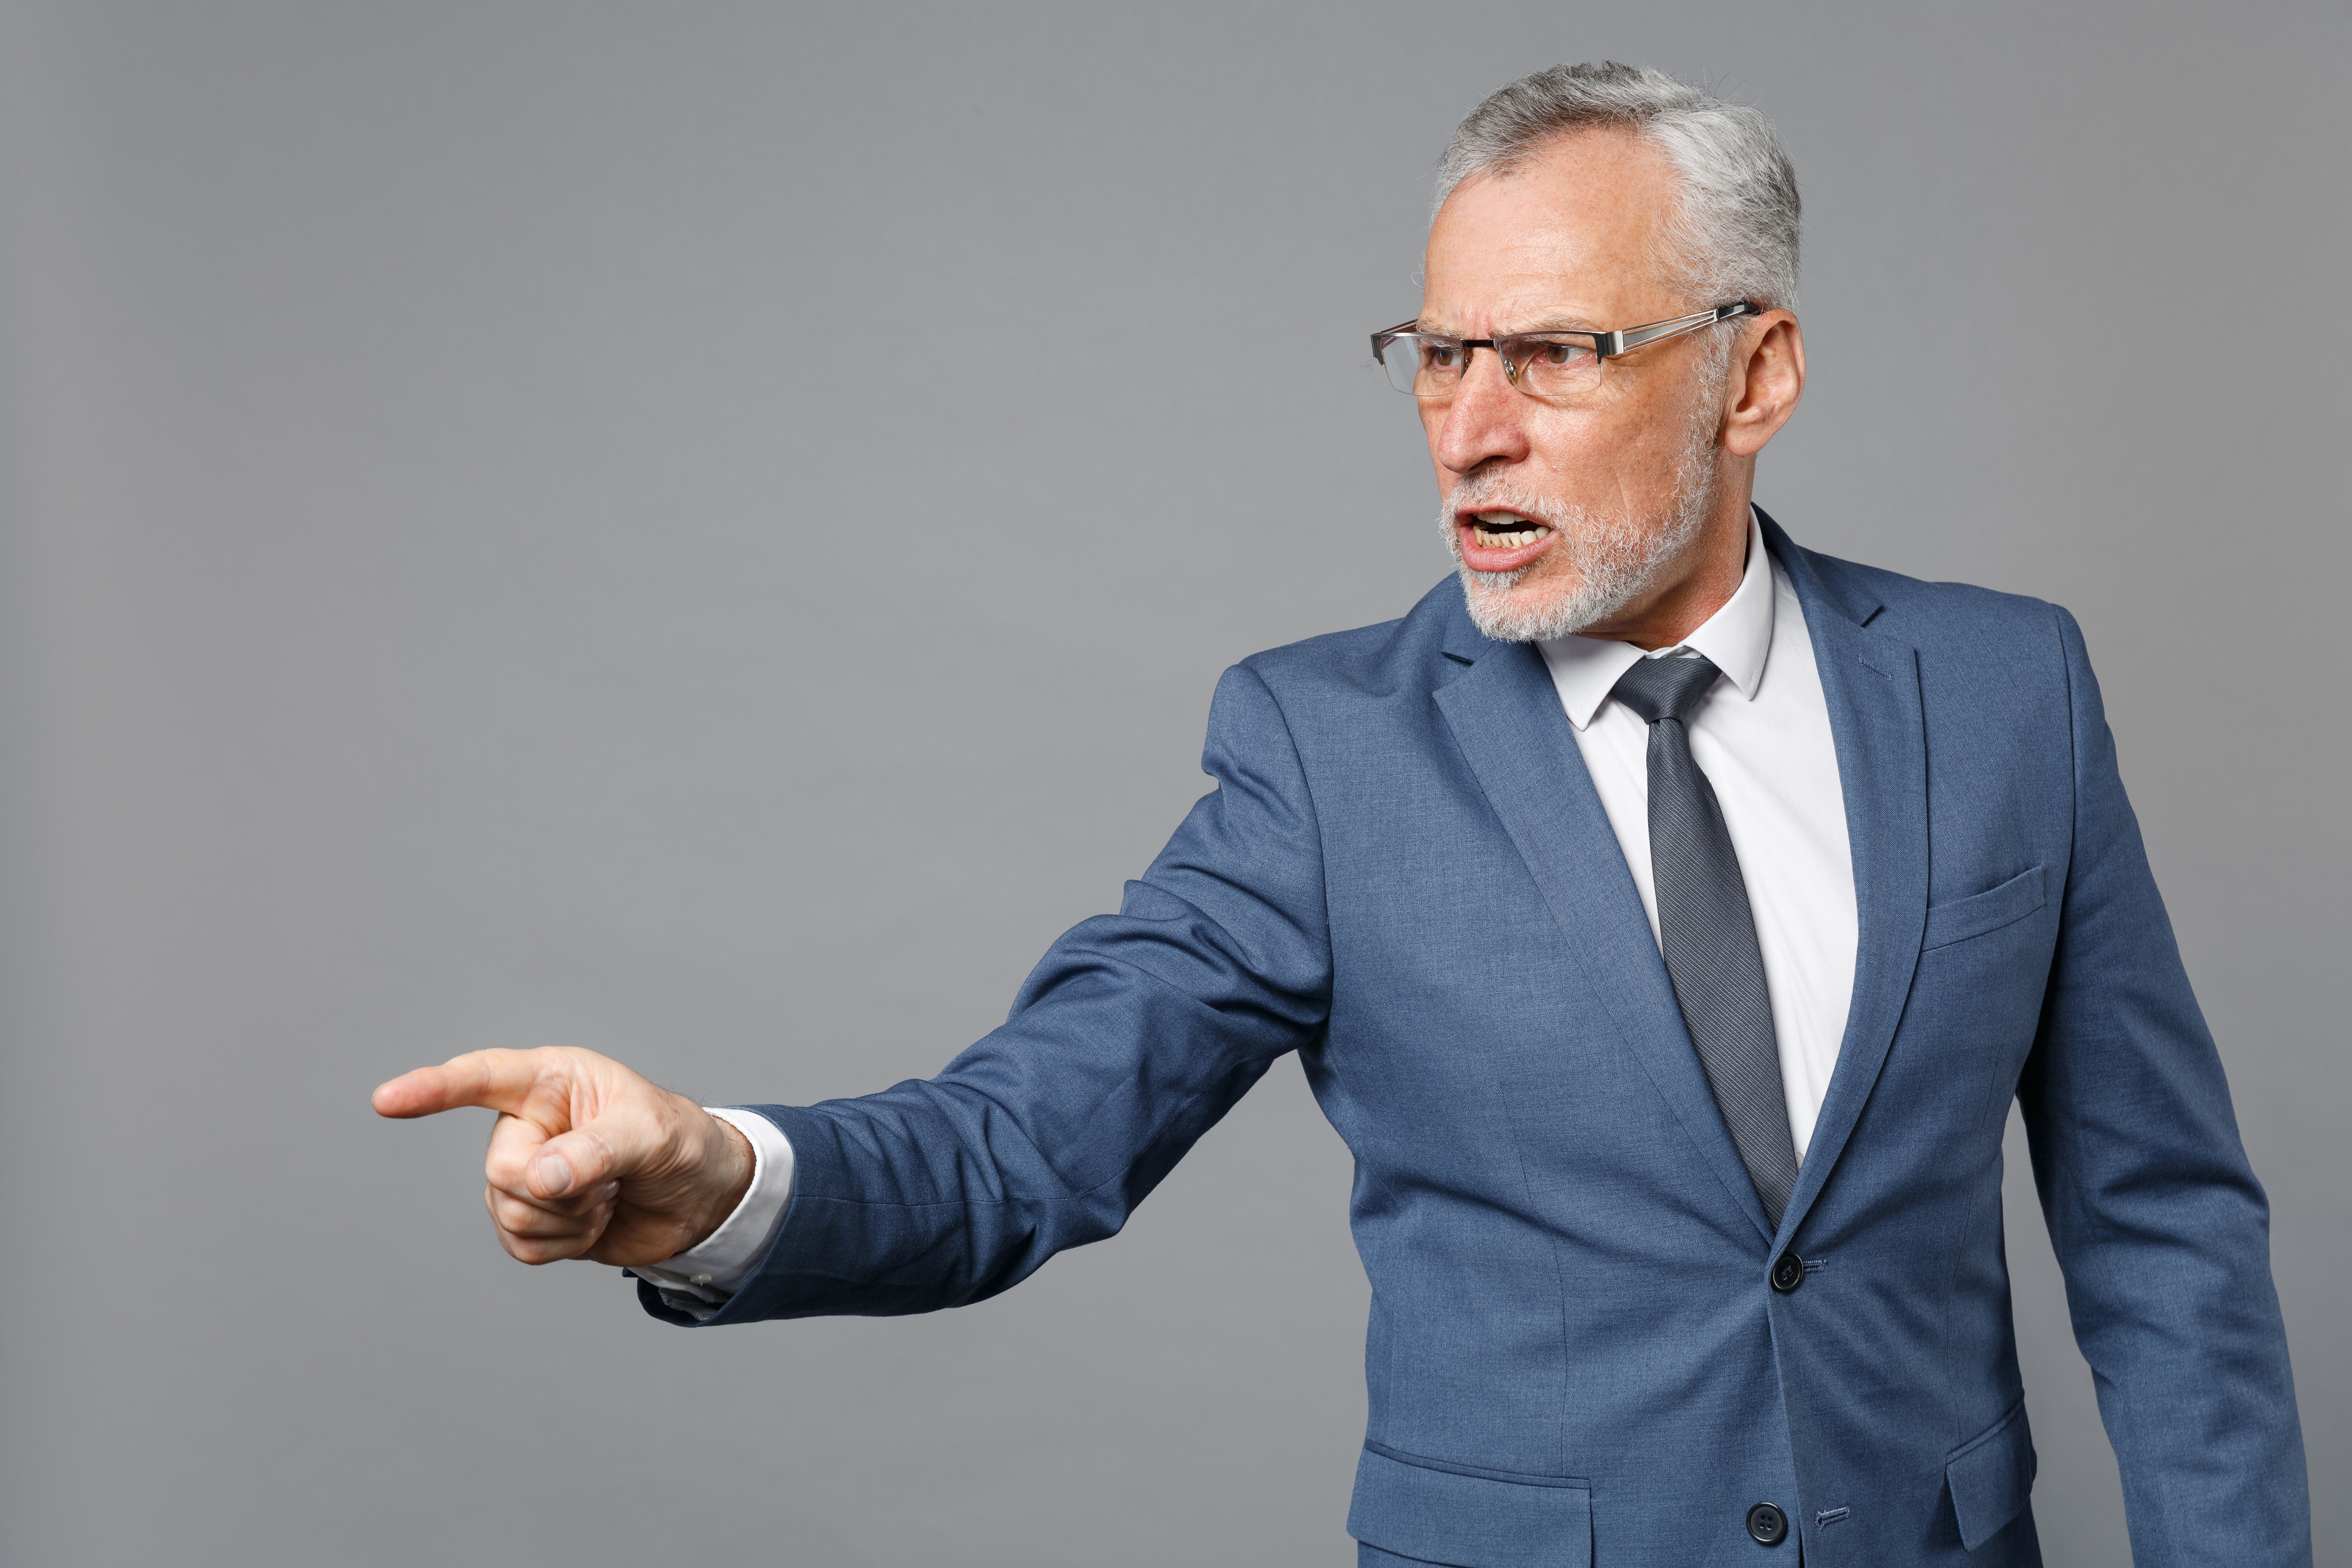 Angry elderly gray-haired bearded business man. | Source: Shutterstock